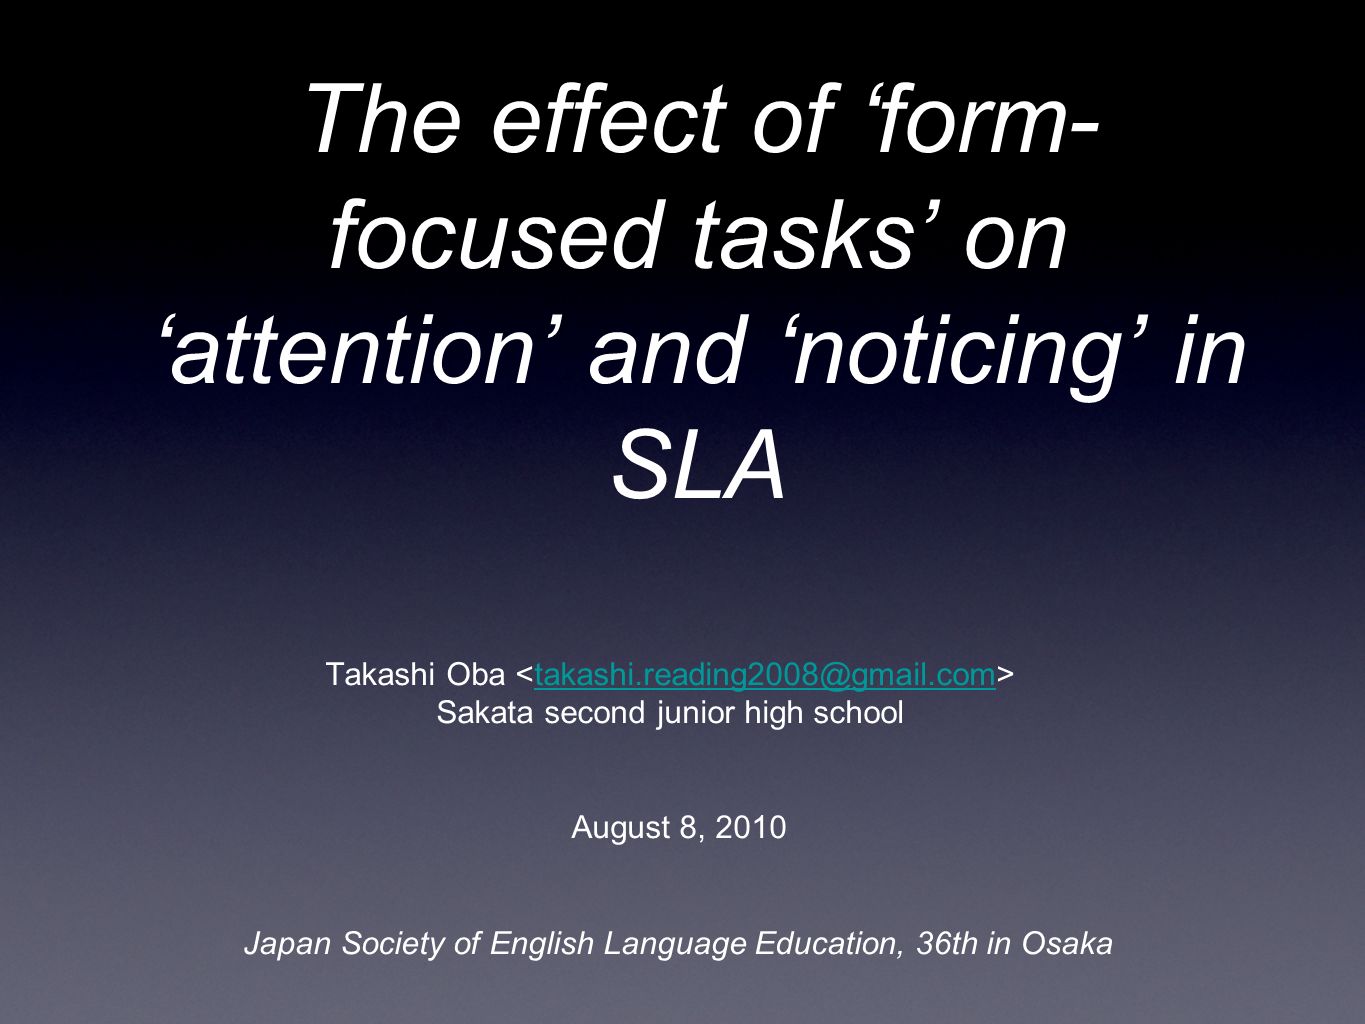 The effect of ‘form-focused tasks’ on ‘attention’ and ‘noticing’ in SLA